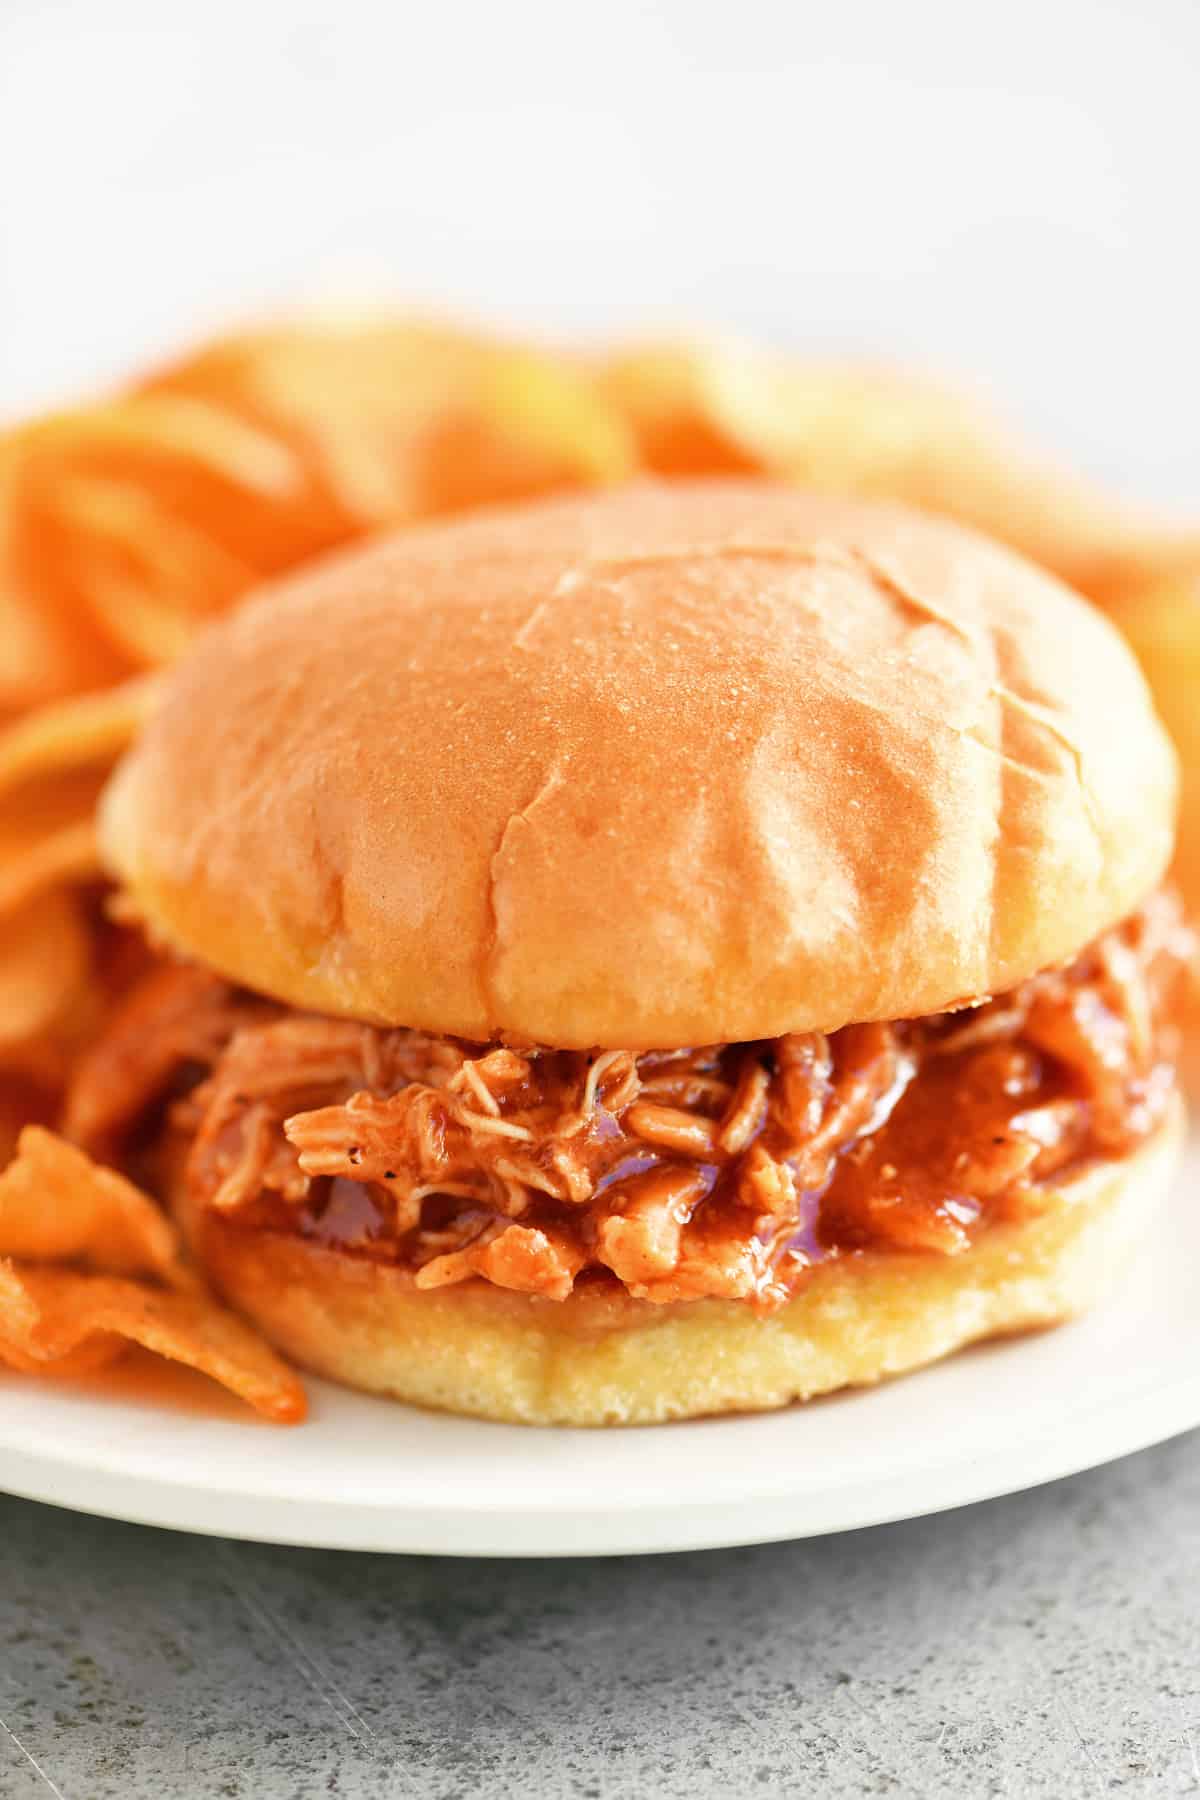 bbq chicken sandwich on a white plate with chips.